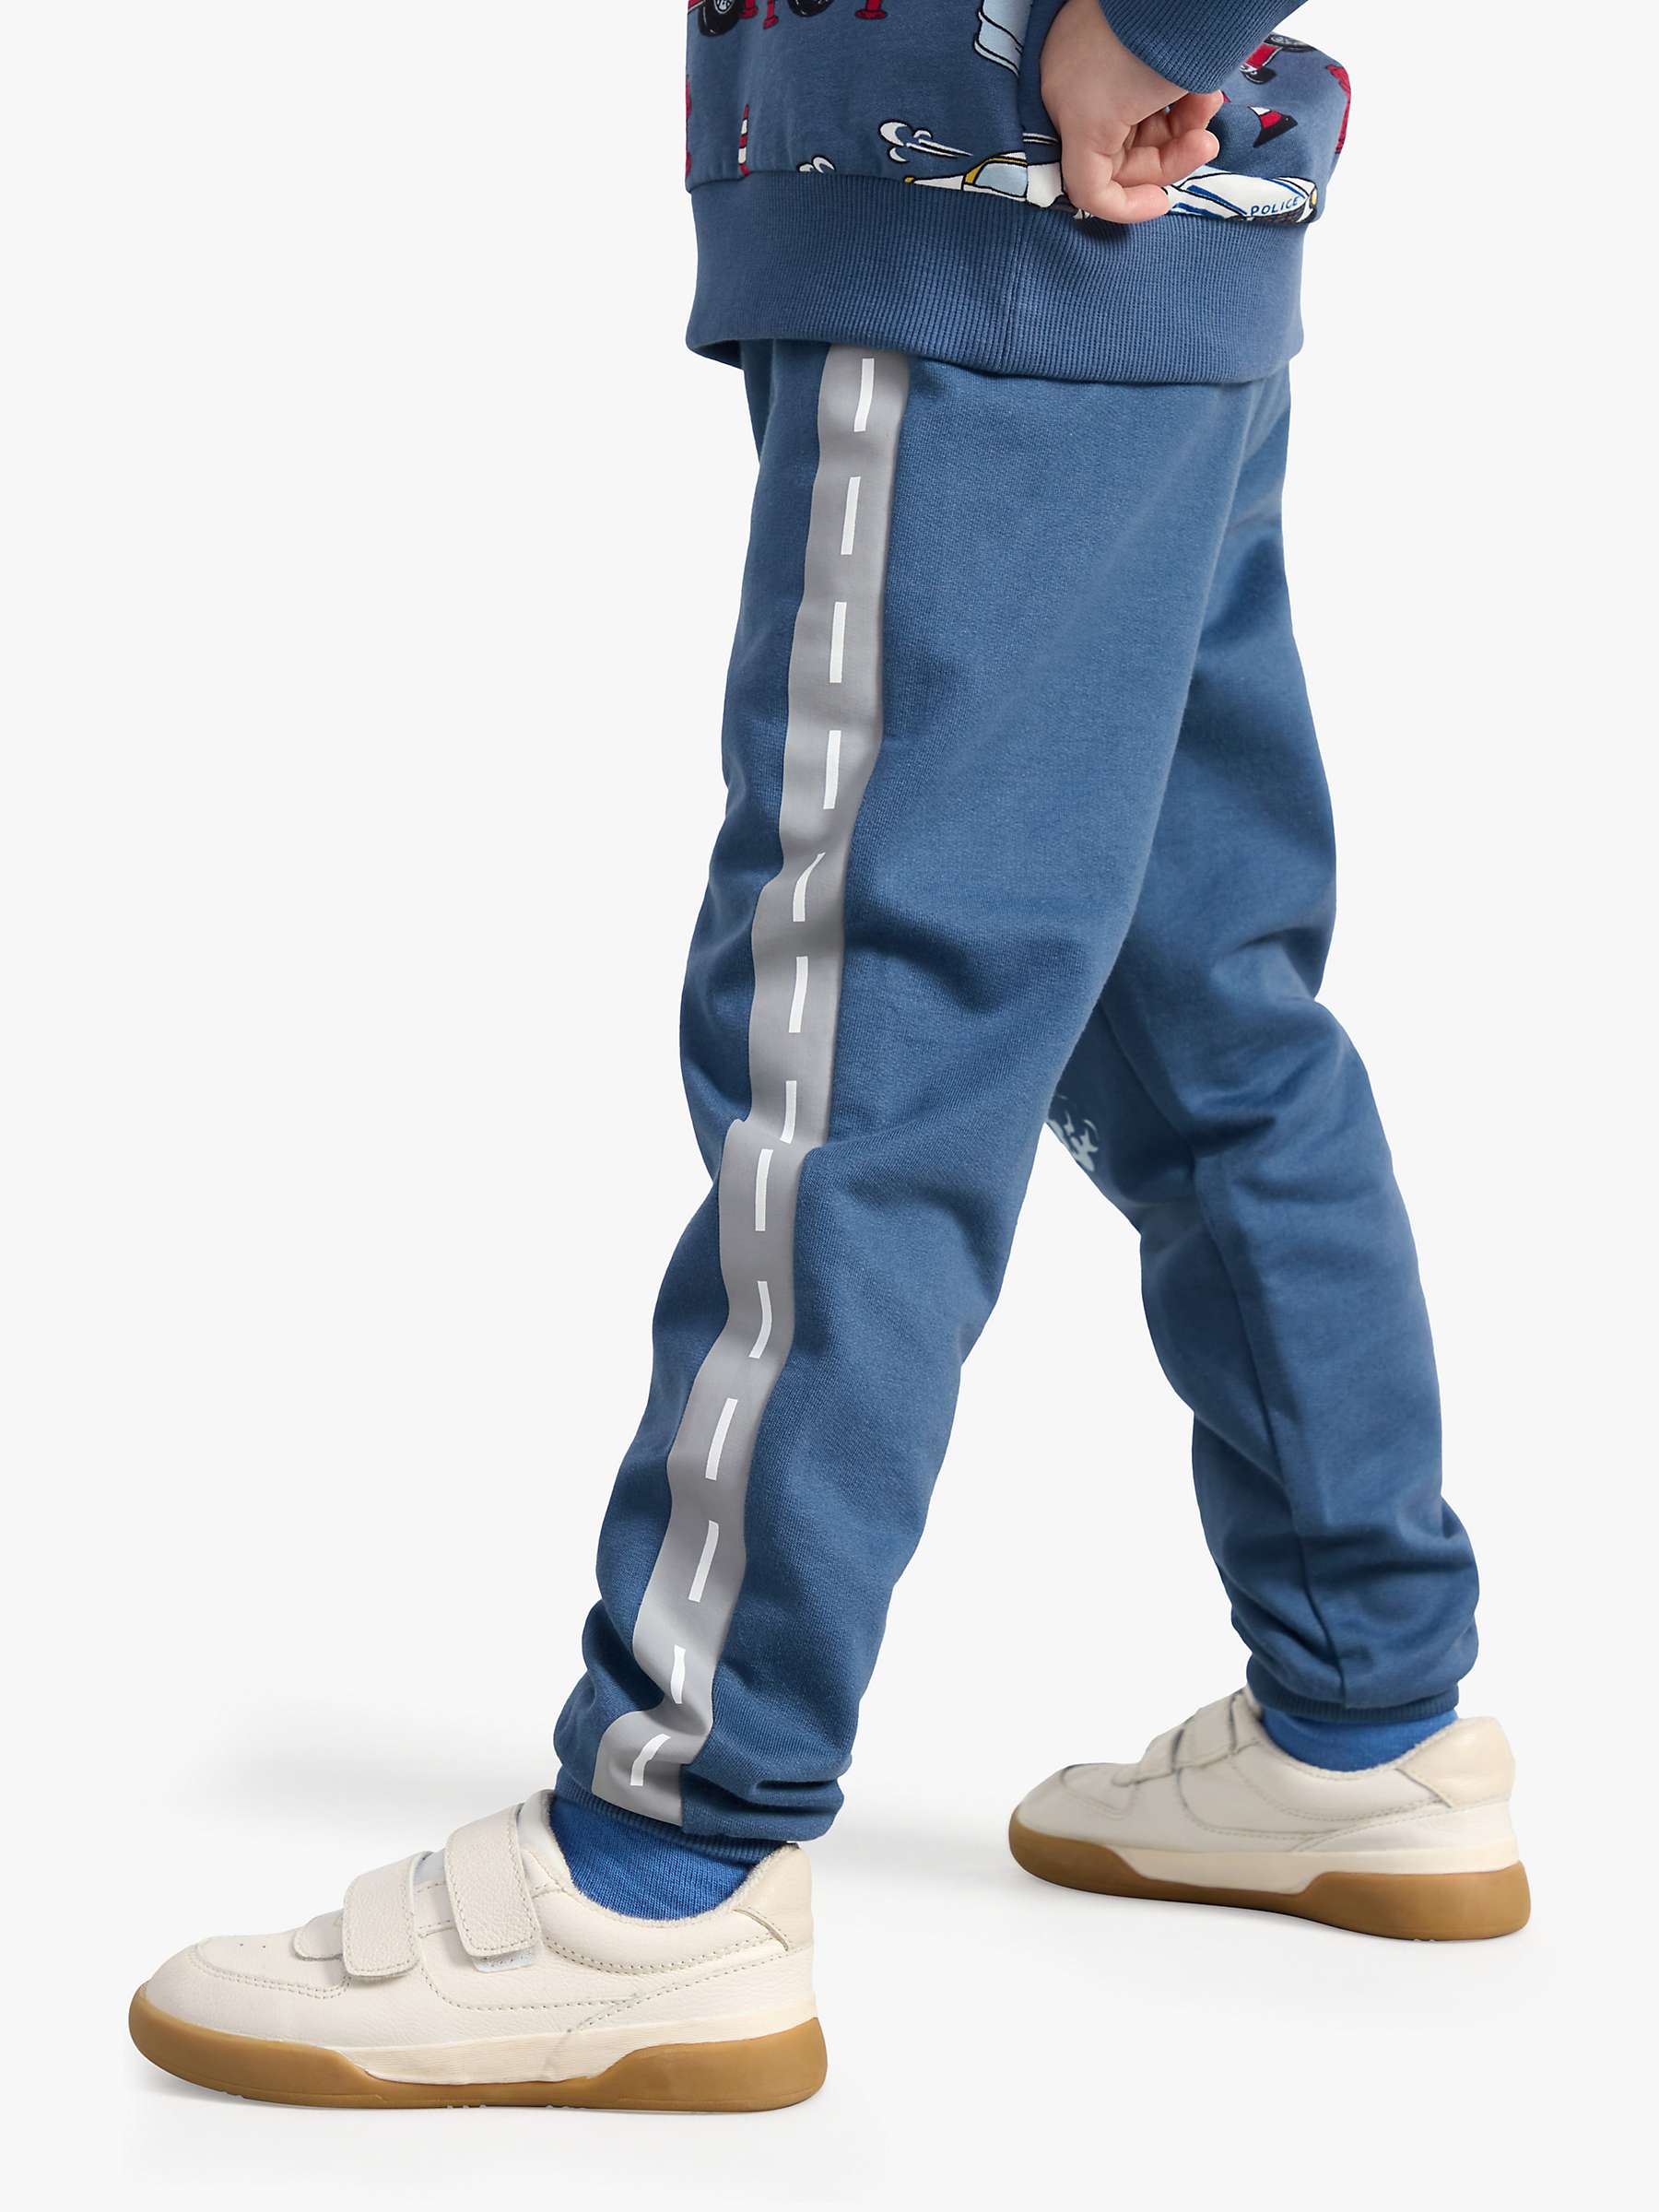 Buy Lindex Kids' Organic Cotton Fire Vehicles Side Print Soft Joggers, Dusty Blue Online at johnlewis.com